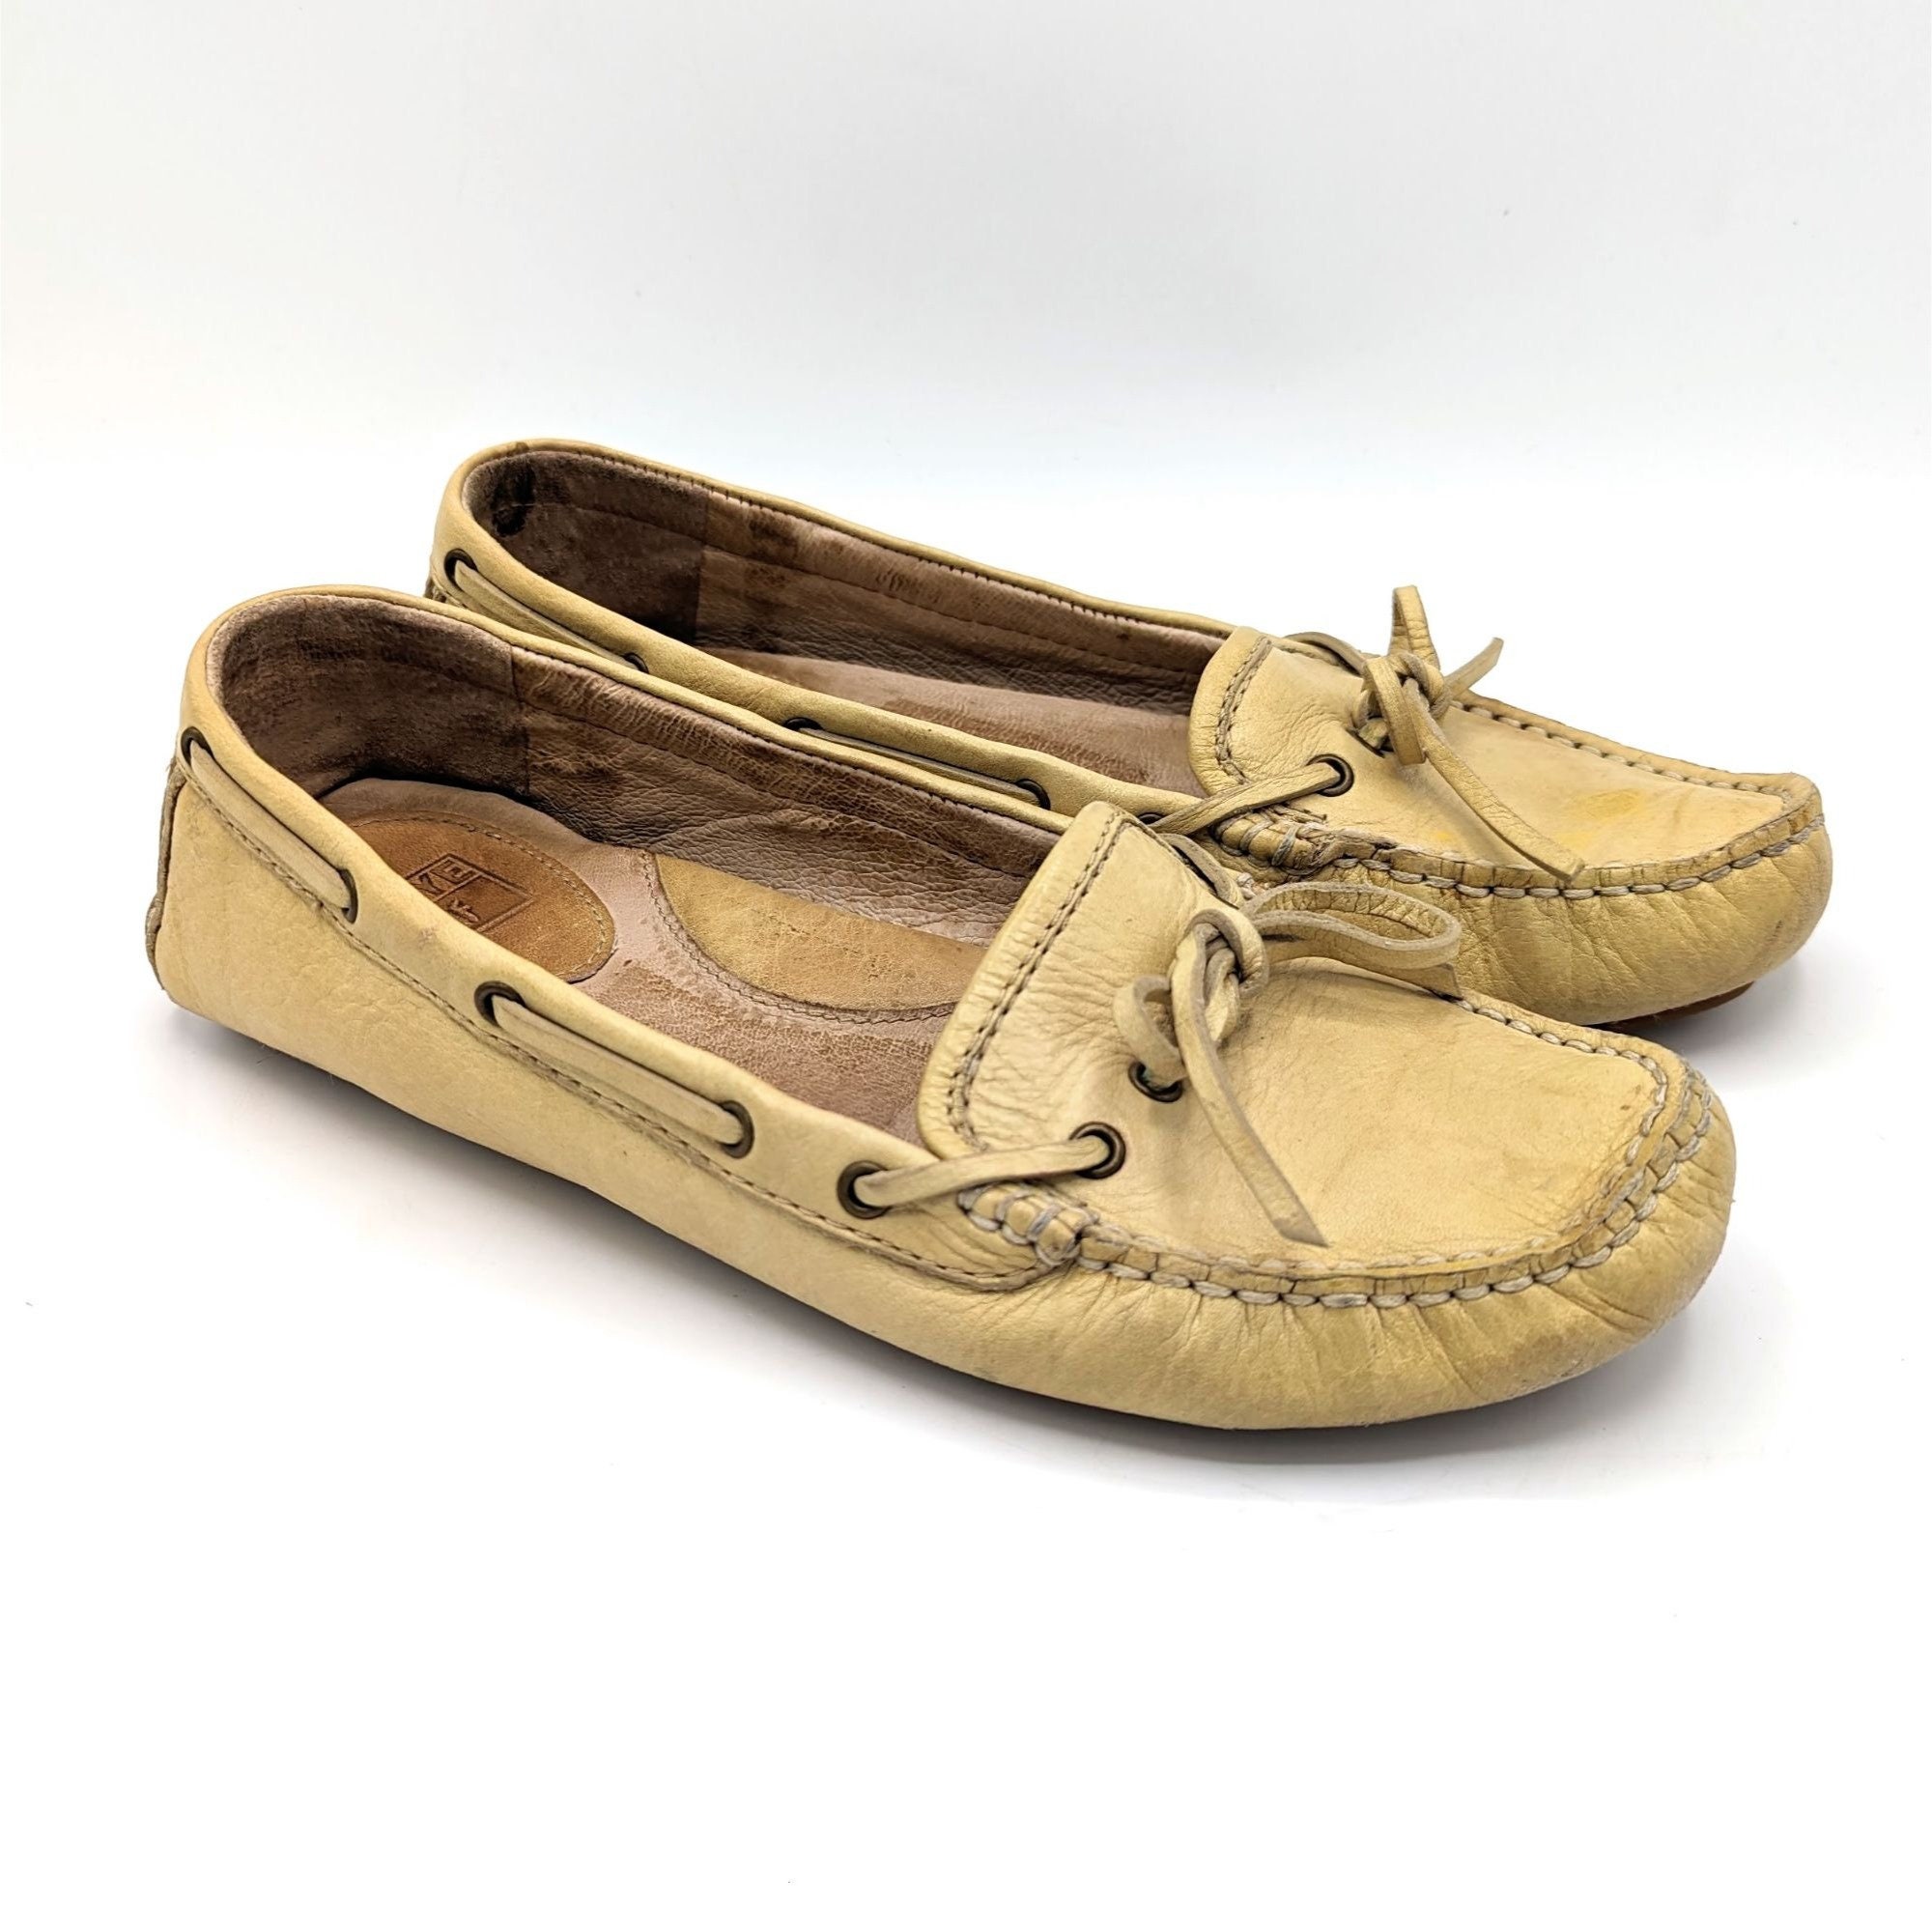 FRYE Reagan Campus Driver Slip on Flats Moc Toe Loafers Pastel